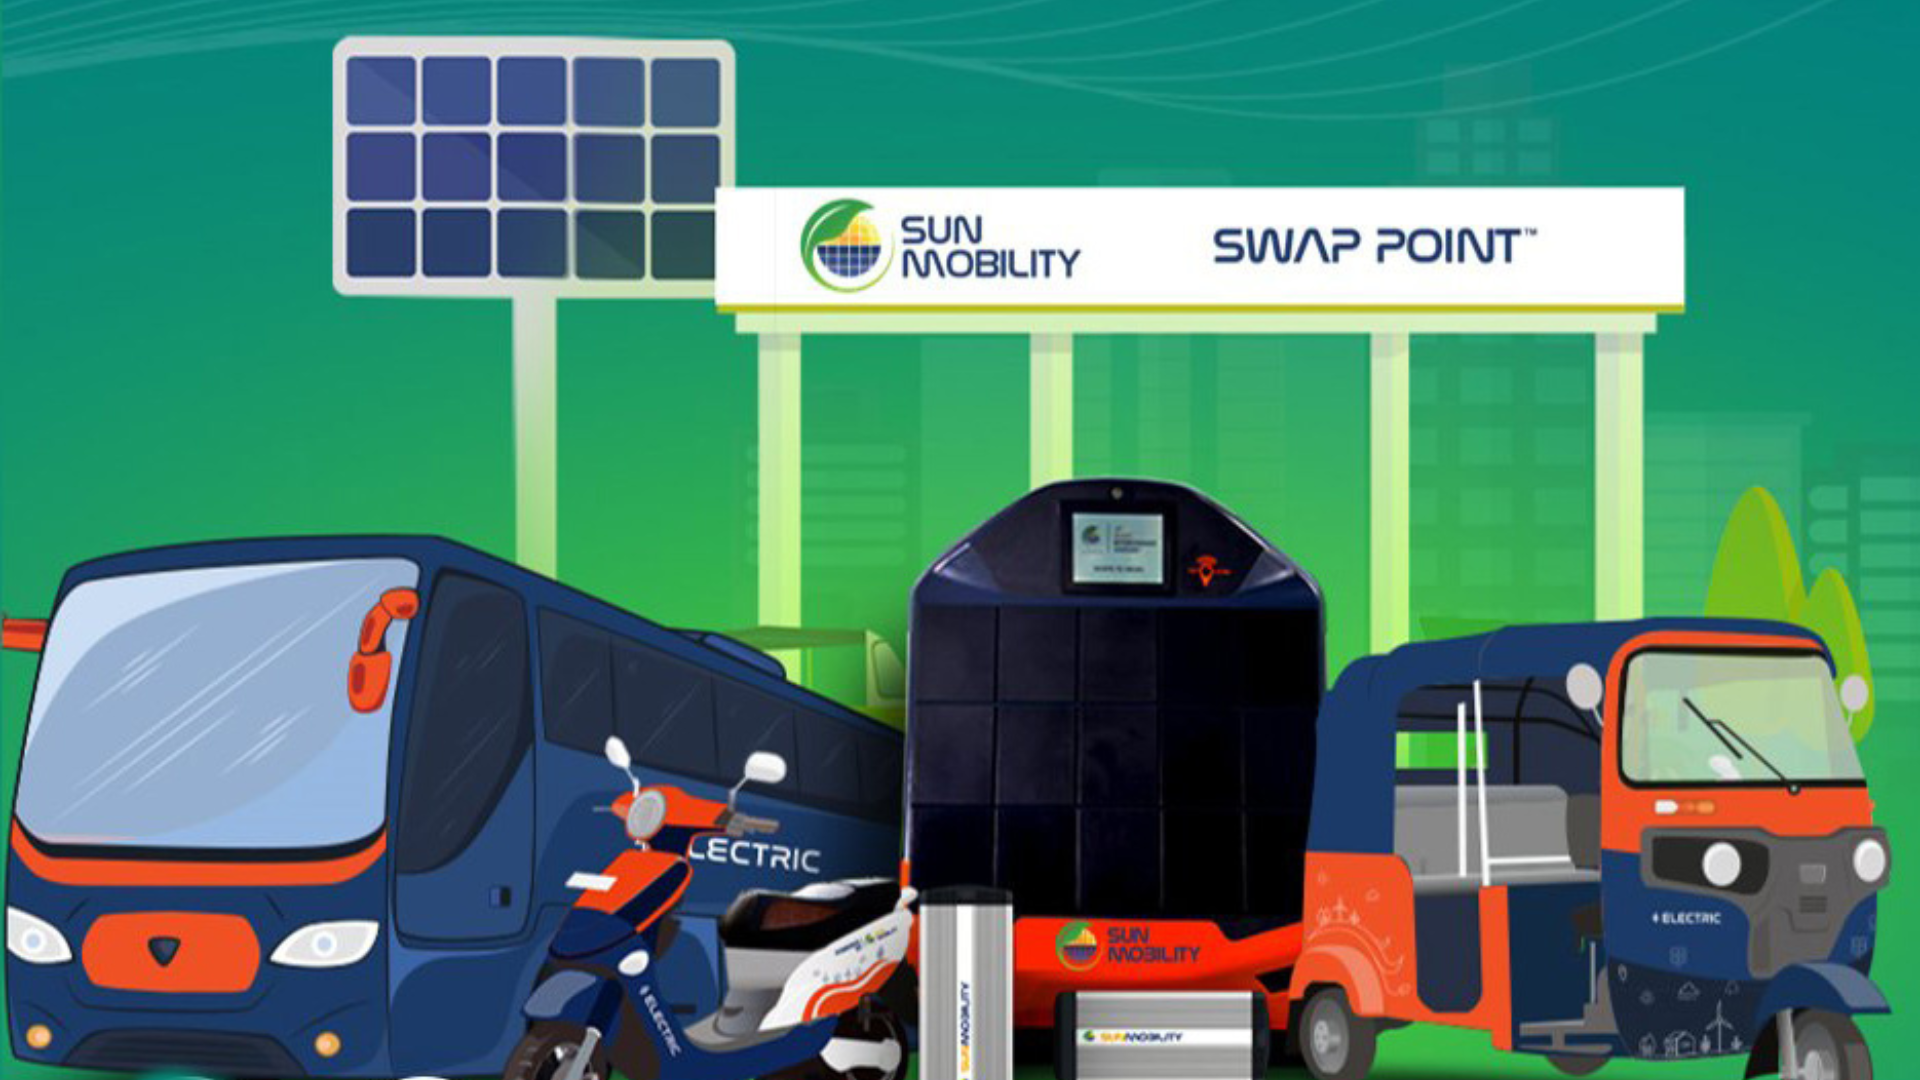 https://e-vehicleinfo.com/sun-mobility-a-game-changer-in-ev-battery-infrastructure/